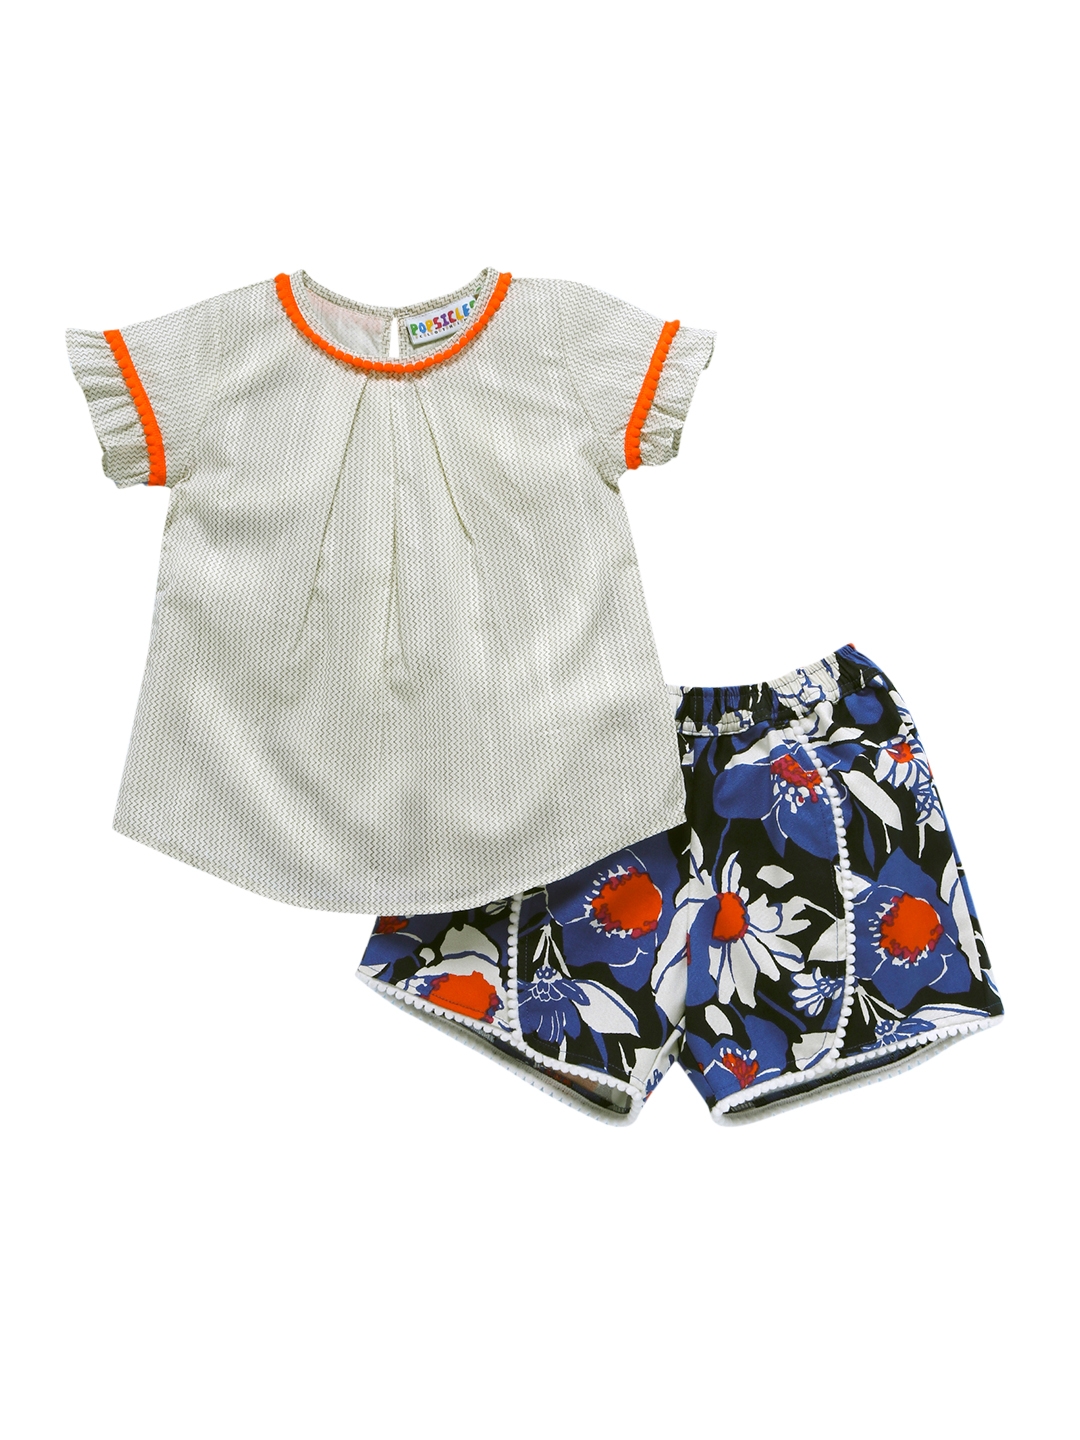 Popsicles Clothing | Popsicles Frost Top and Short Set Regular Fit For Girl - White and Blue